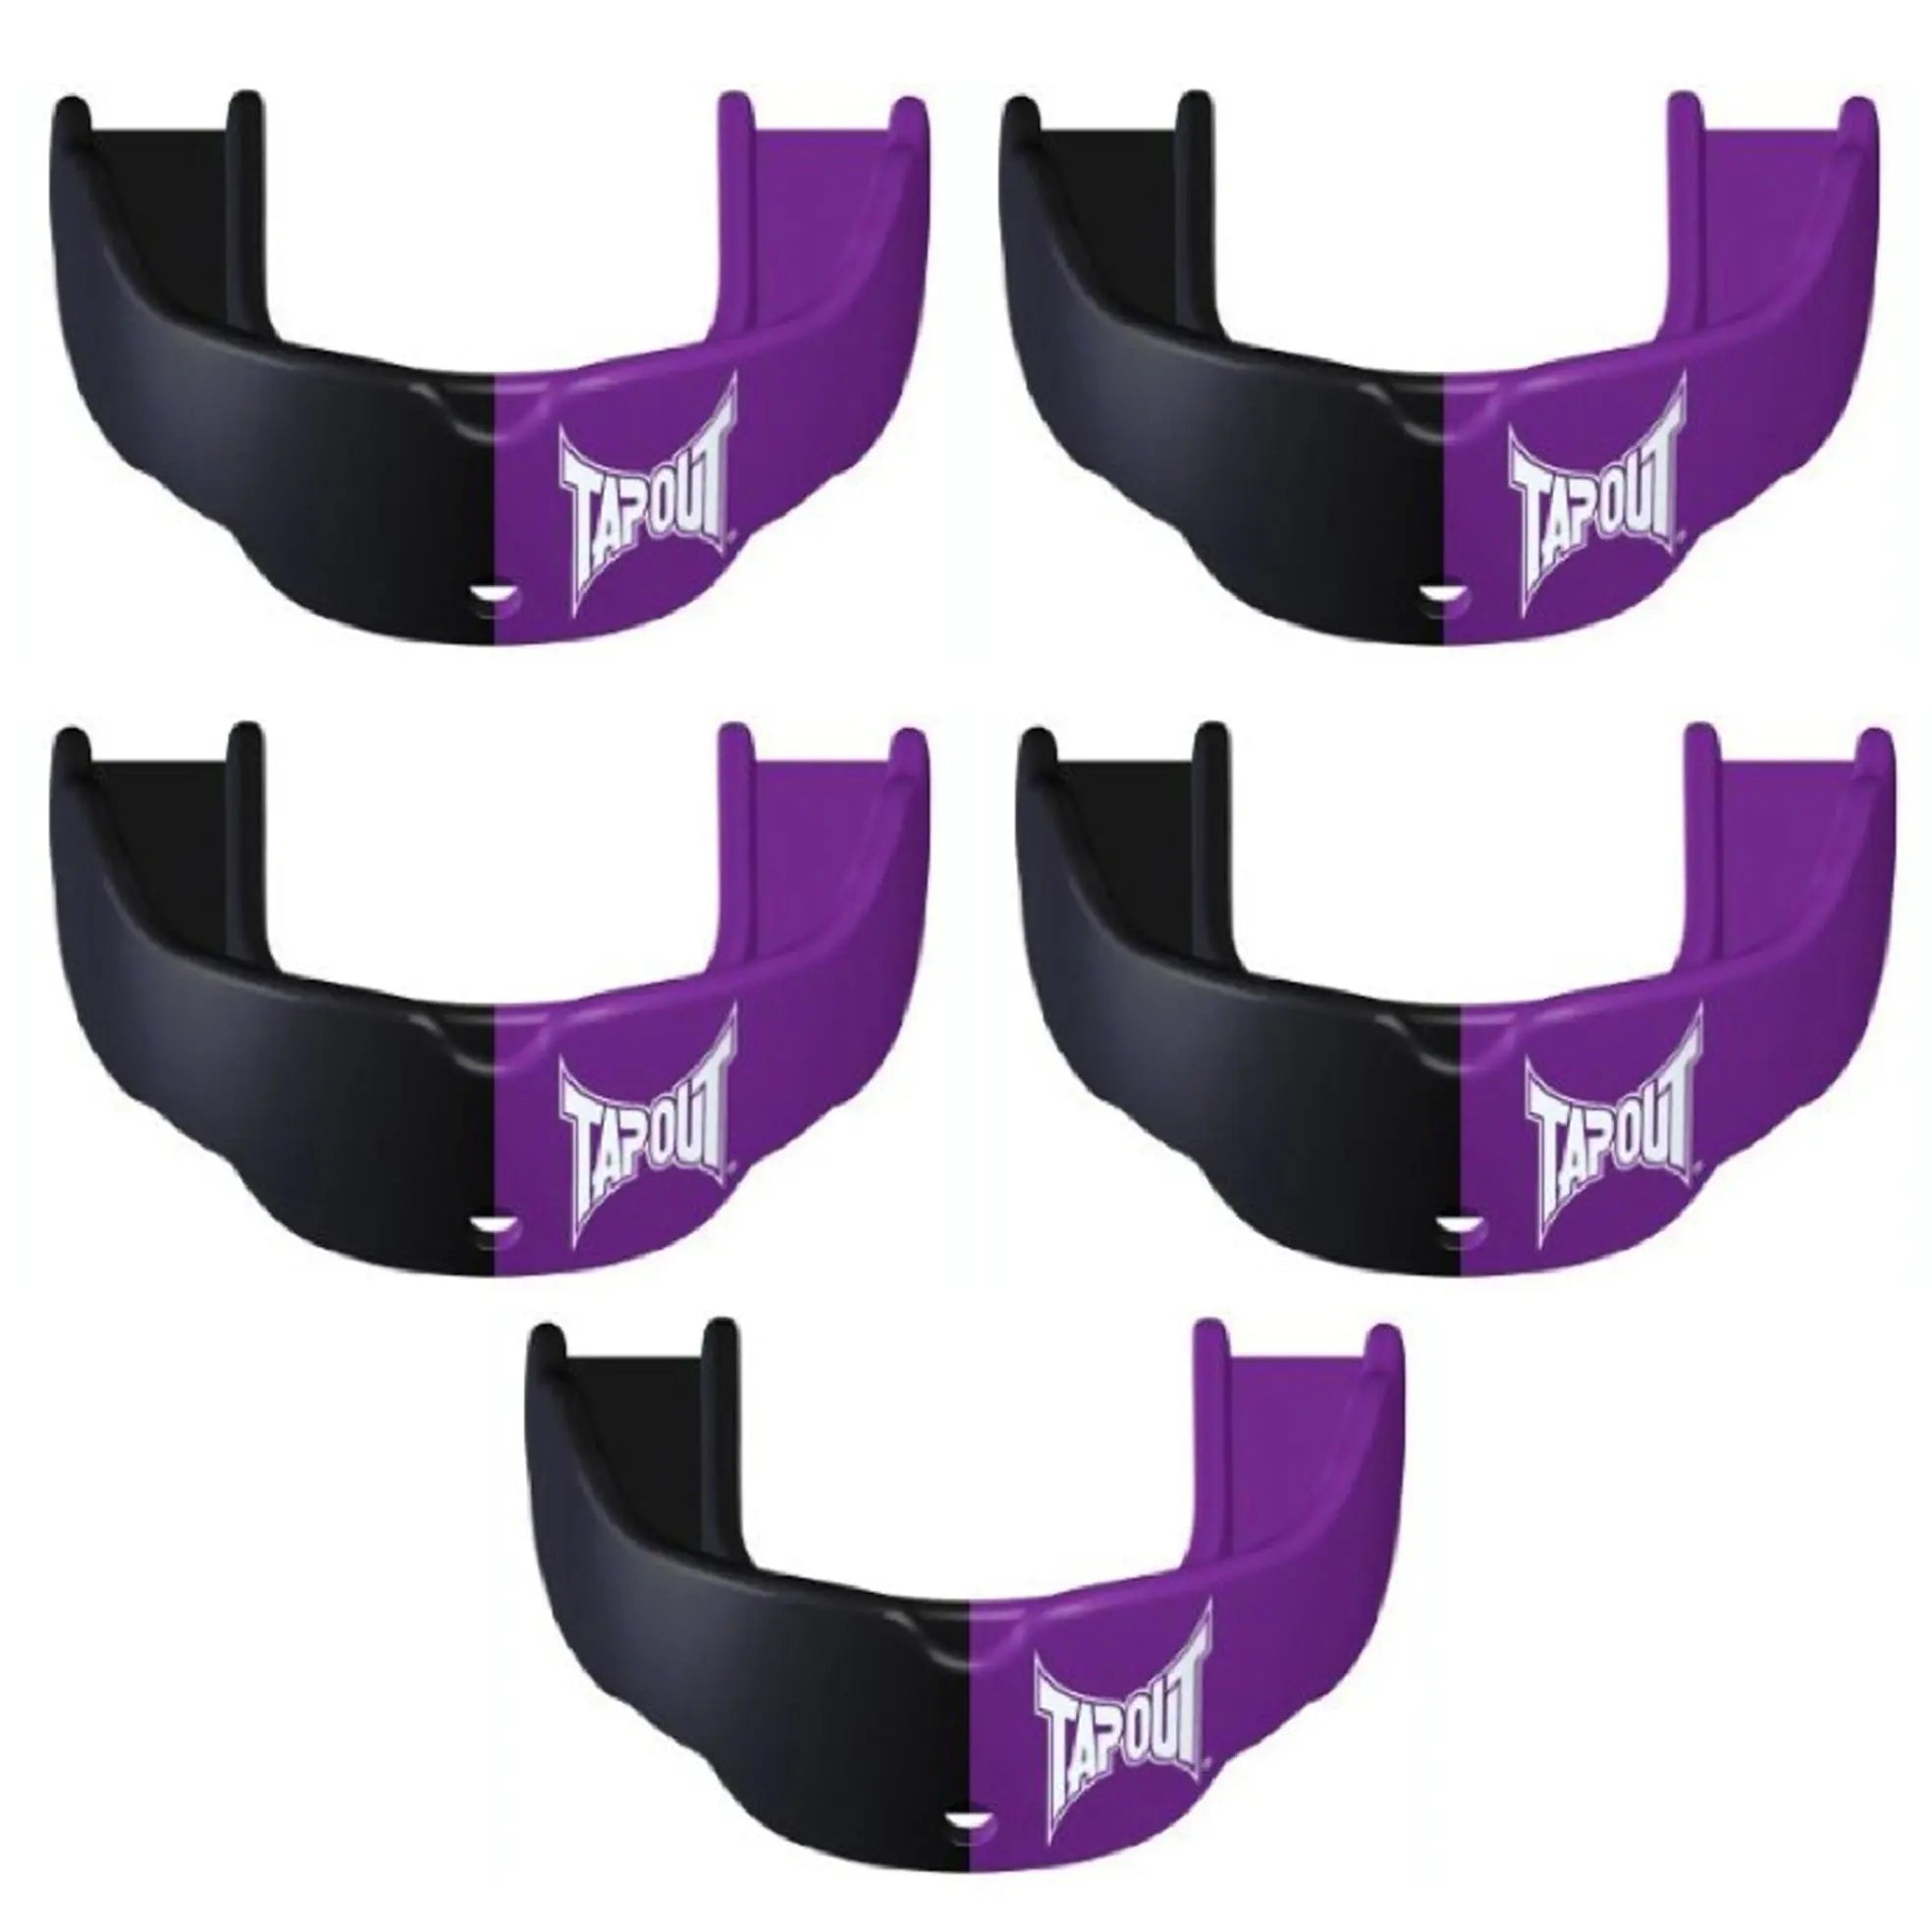 Tapout Youth Protective Sports Mouthguard with Strap 5-Pack - Purple/Black Tapout